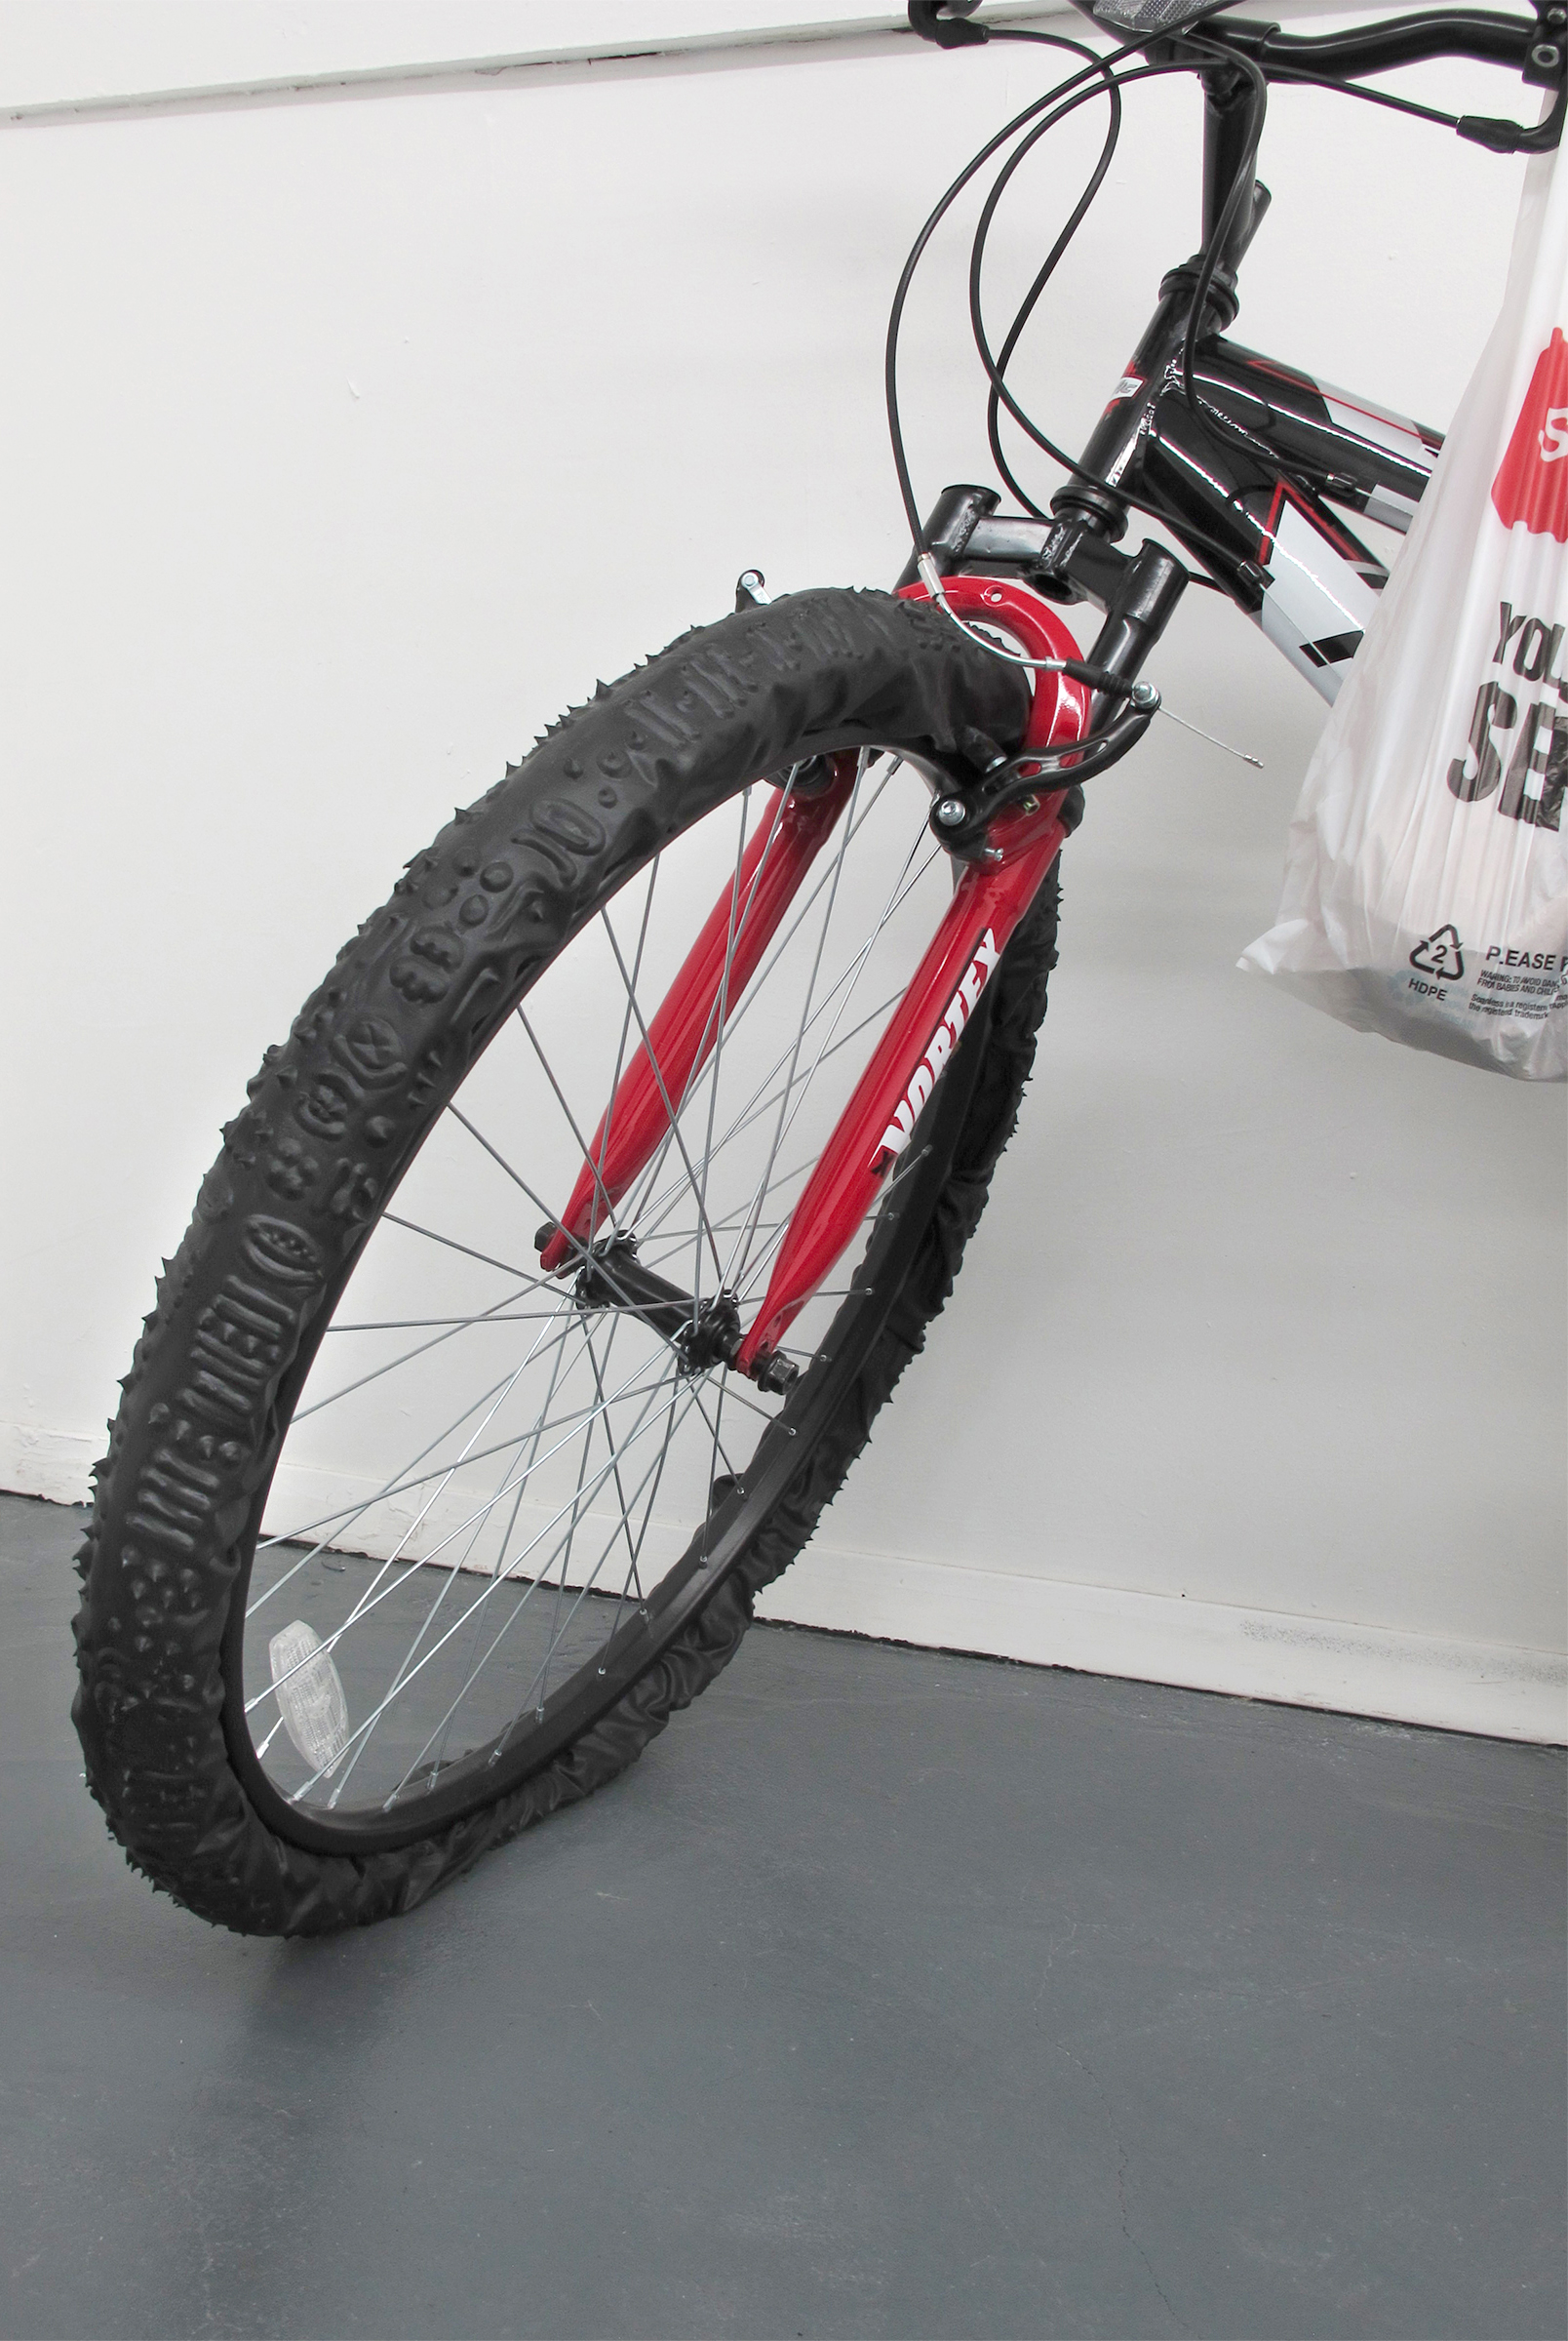  Michael Assiff,&nbsp;Bike  (Seamless, French Intervention in Mexico) ,&nbsp;2015, bicycle, plastic and grocery bags, dimensions variable 